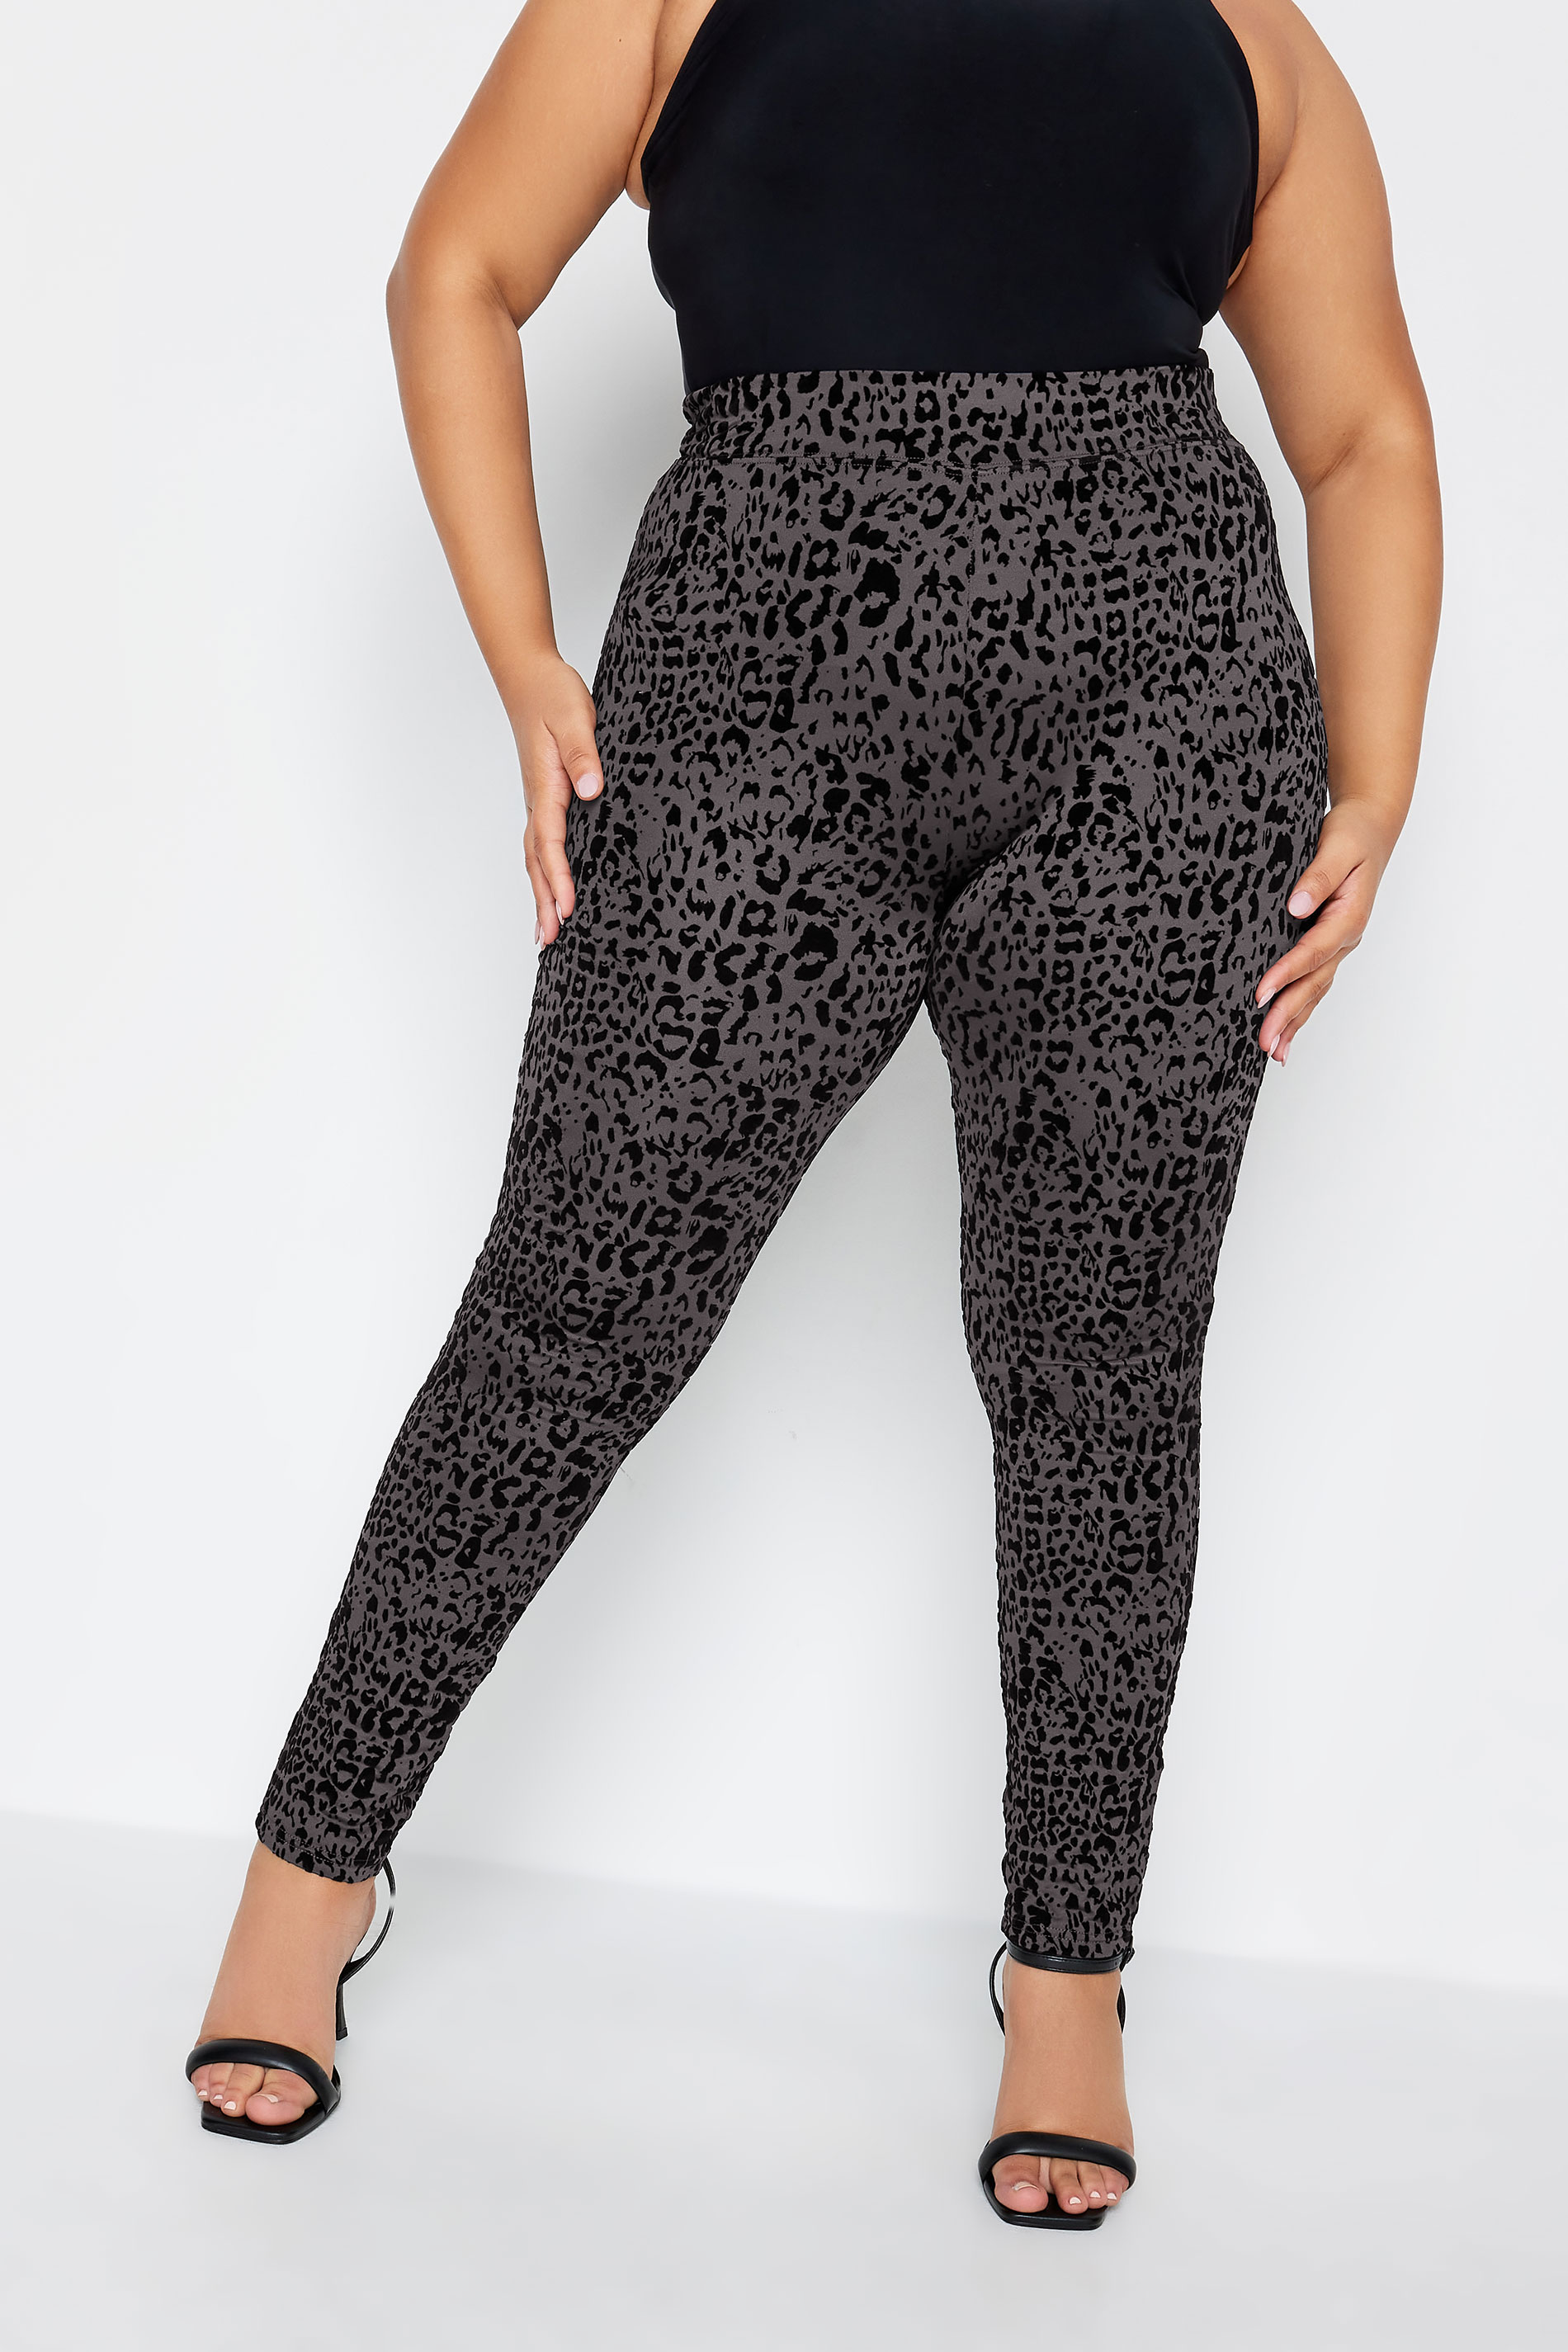 YOURS Plus Size Grey Flocked Leopard Print Leggings | Yours Clothing 1